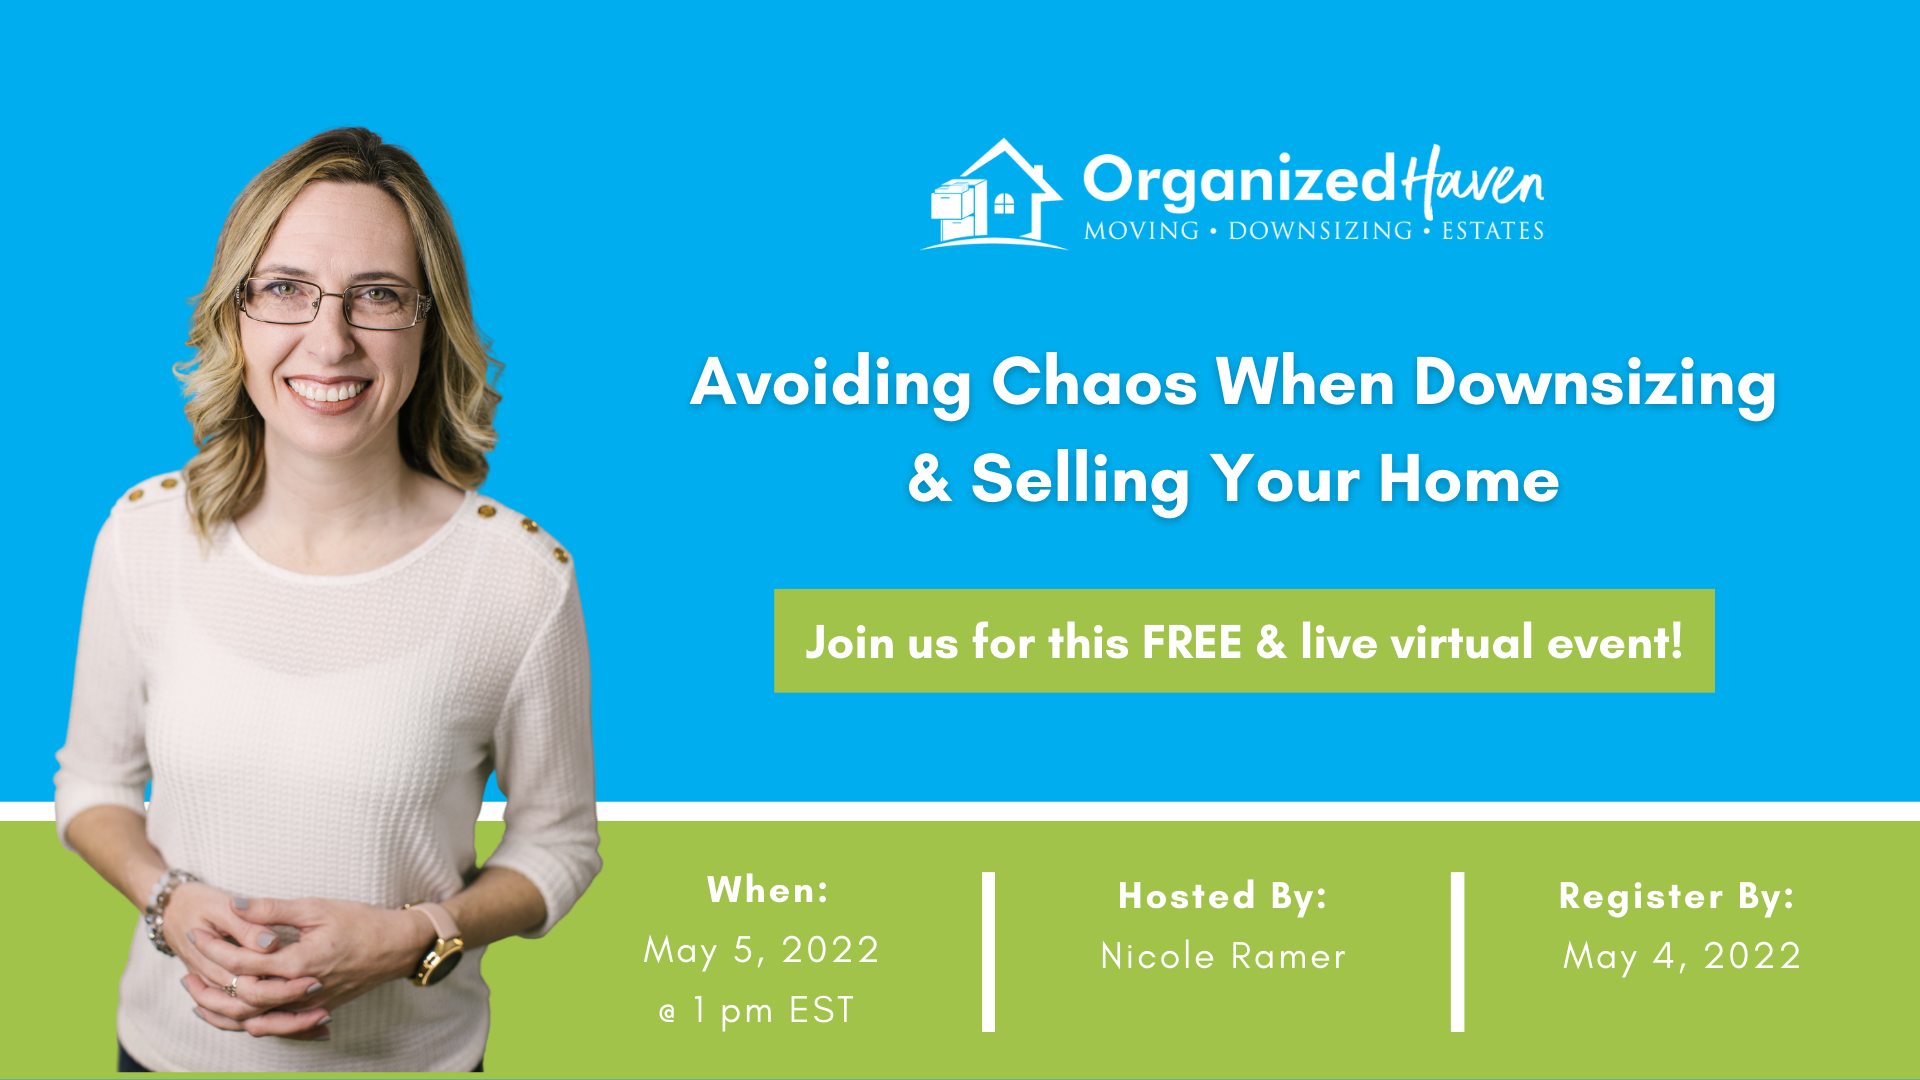 Avoiding Chaos When Downsizing & Selling Your Home